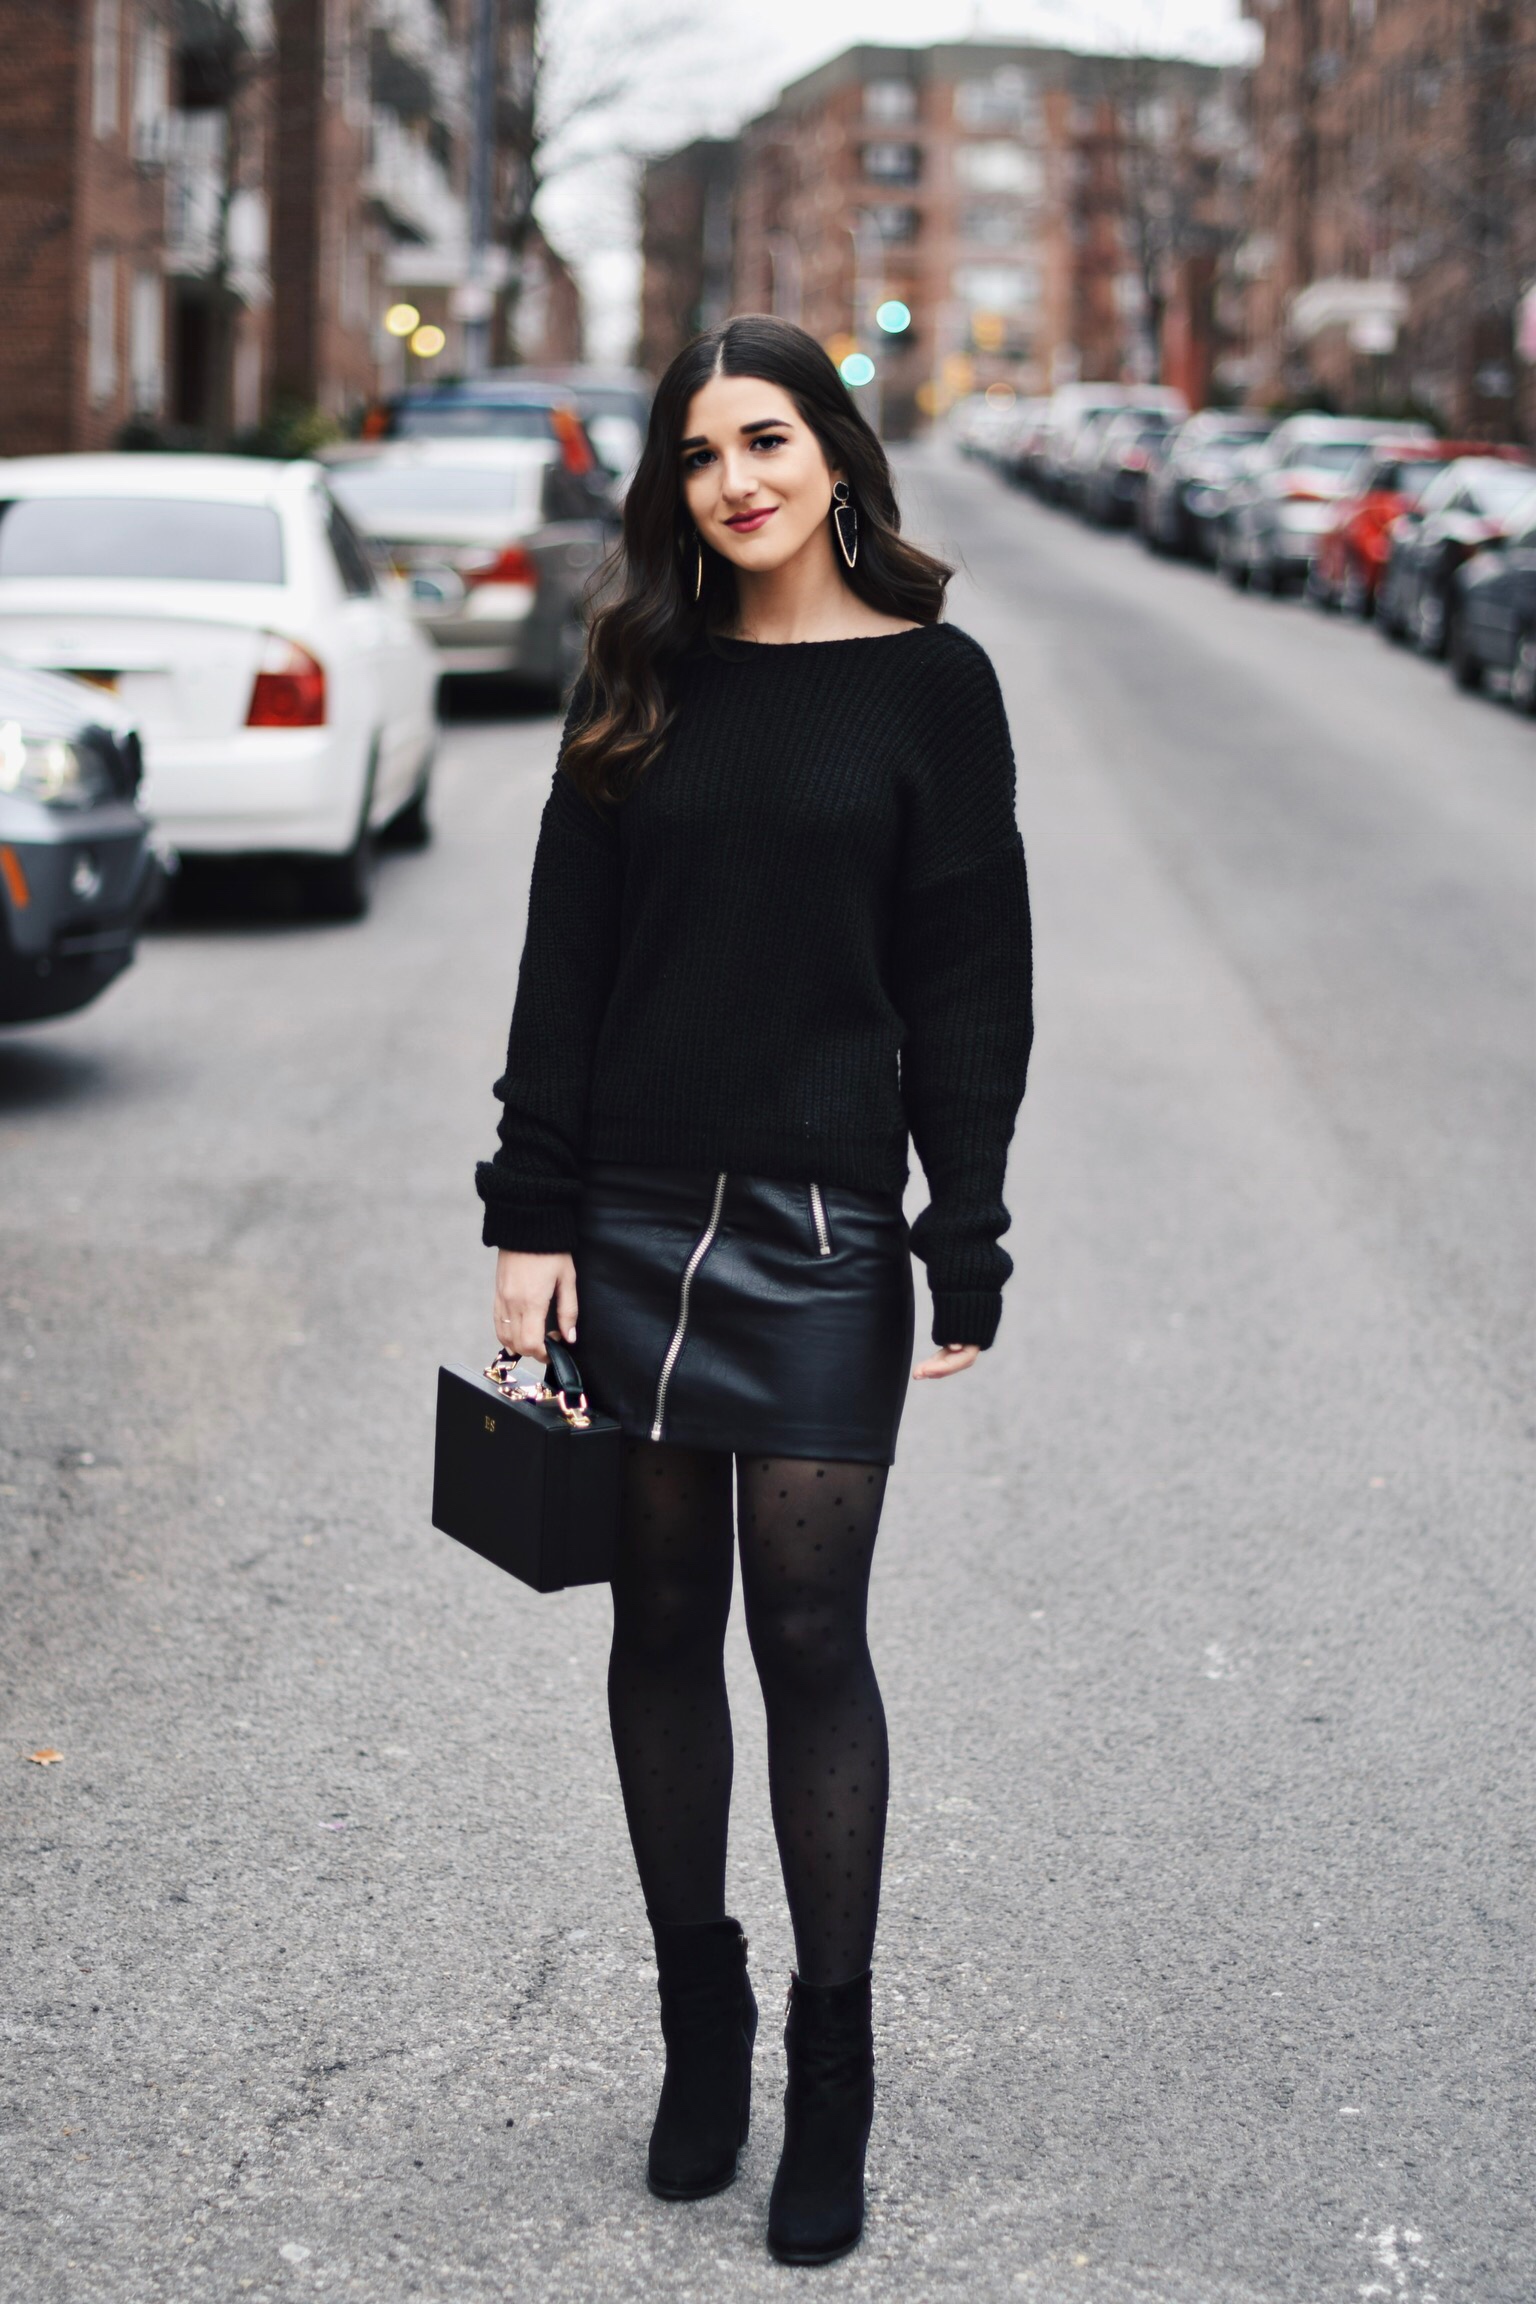 All Black Look 5 Ways To Keep Your New Year's Resolution Going Strong Esther Santer Fashion Blog NYC Street Style Blogger Outfit OOTD Trendy BaubleBar Earrings Monogrammed Box Bag Daily Edited Girl Women Booties Pleather Mini Skirt Polka Dot Tights.jpg